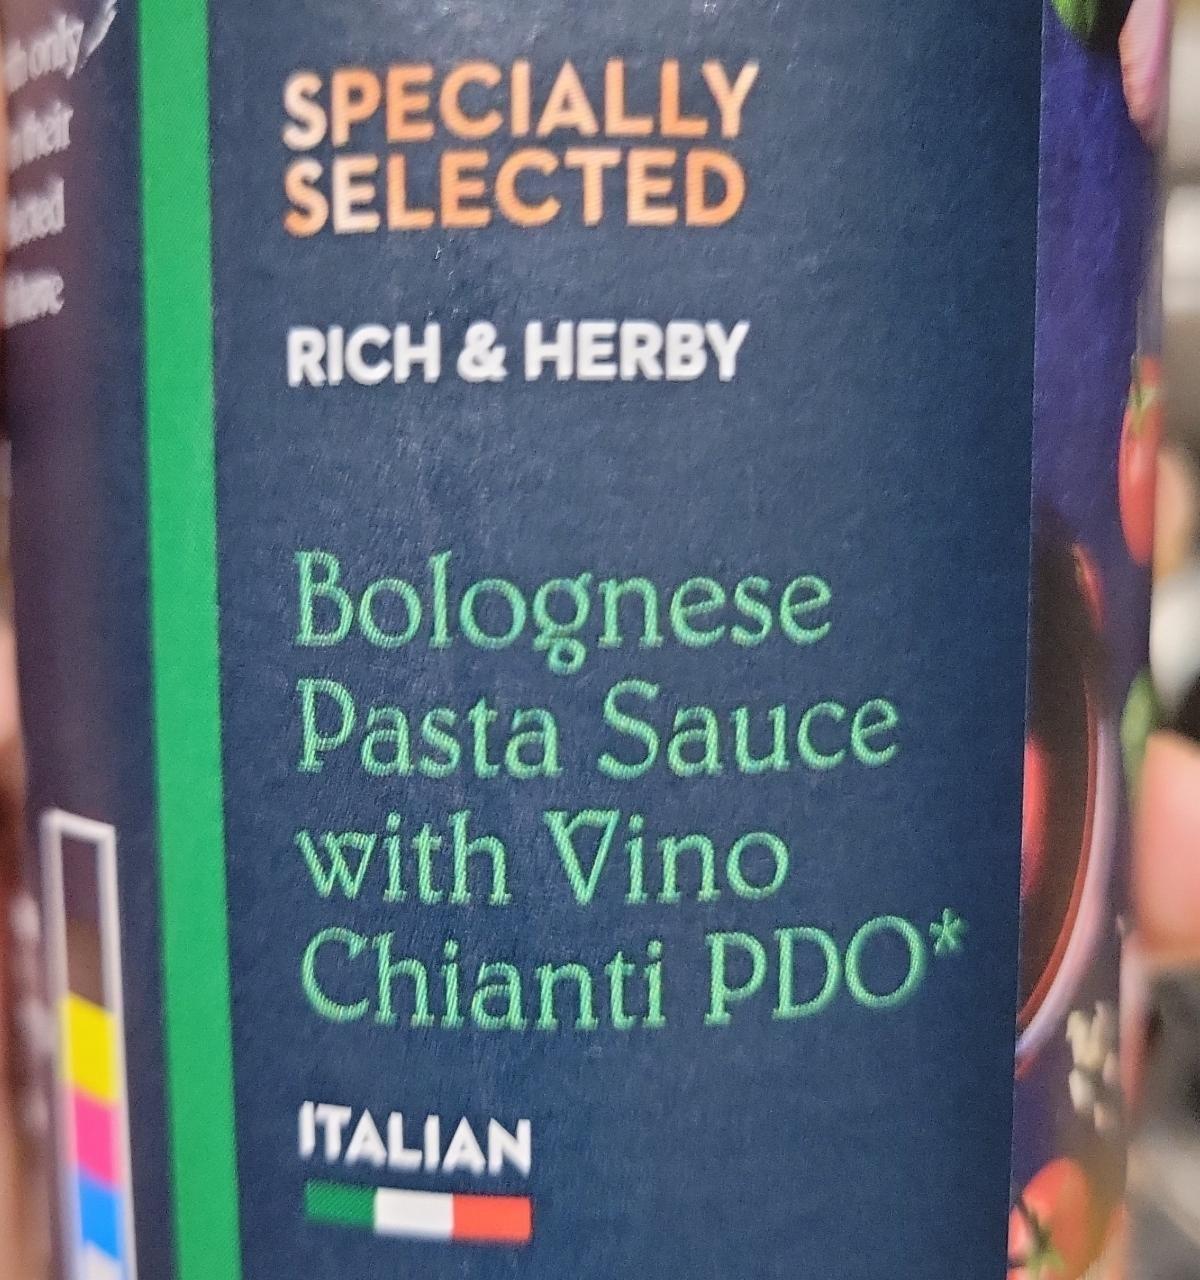 Fotografie - Bolognese Pasta Sauce with Vino Chianti PDO Specially Selected